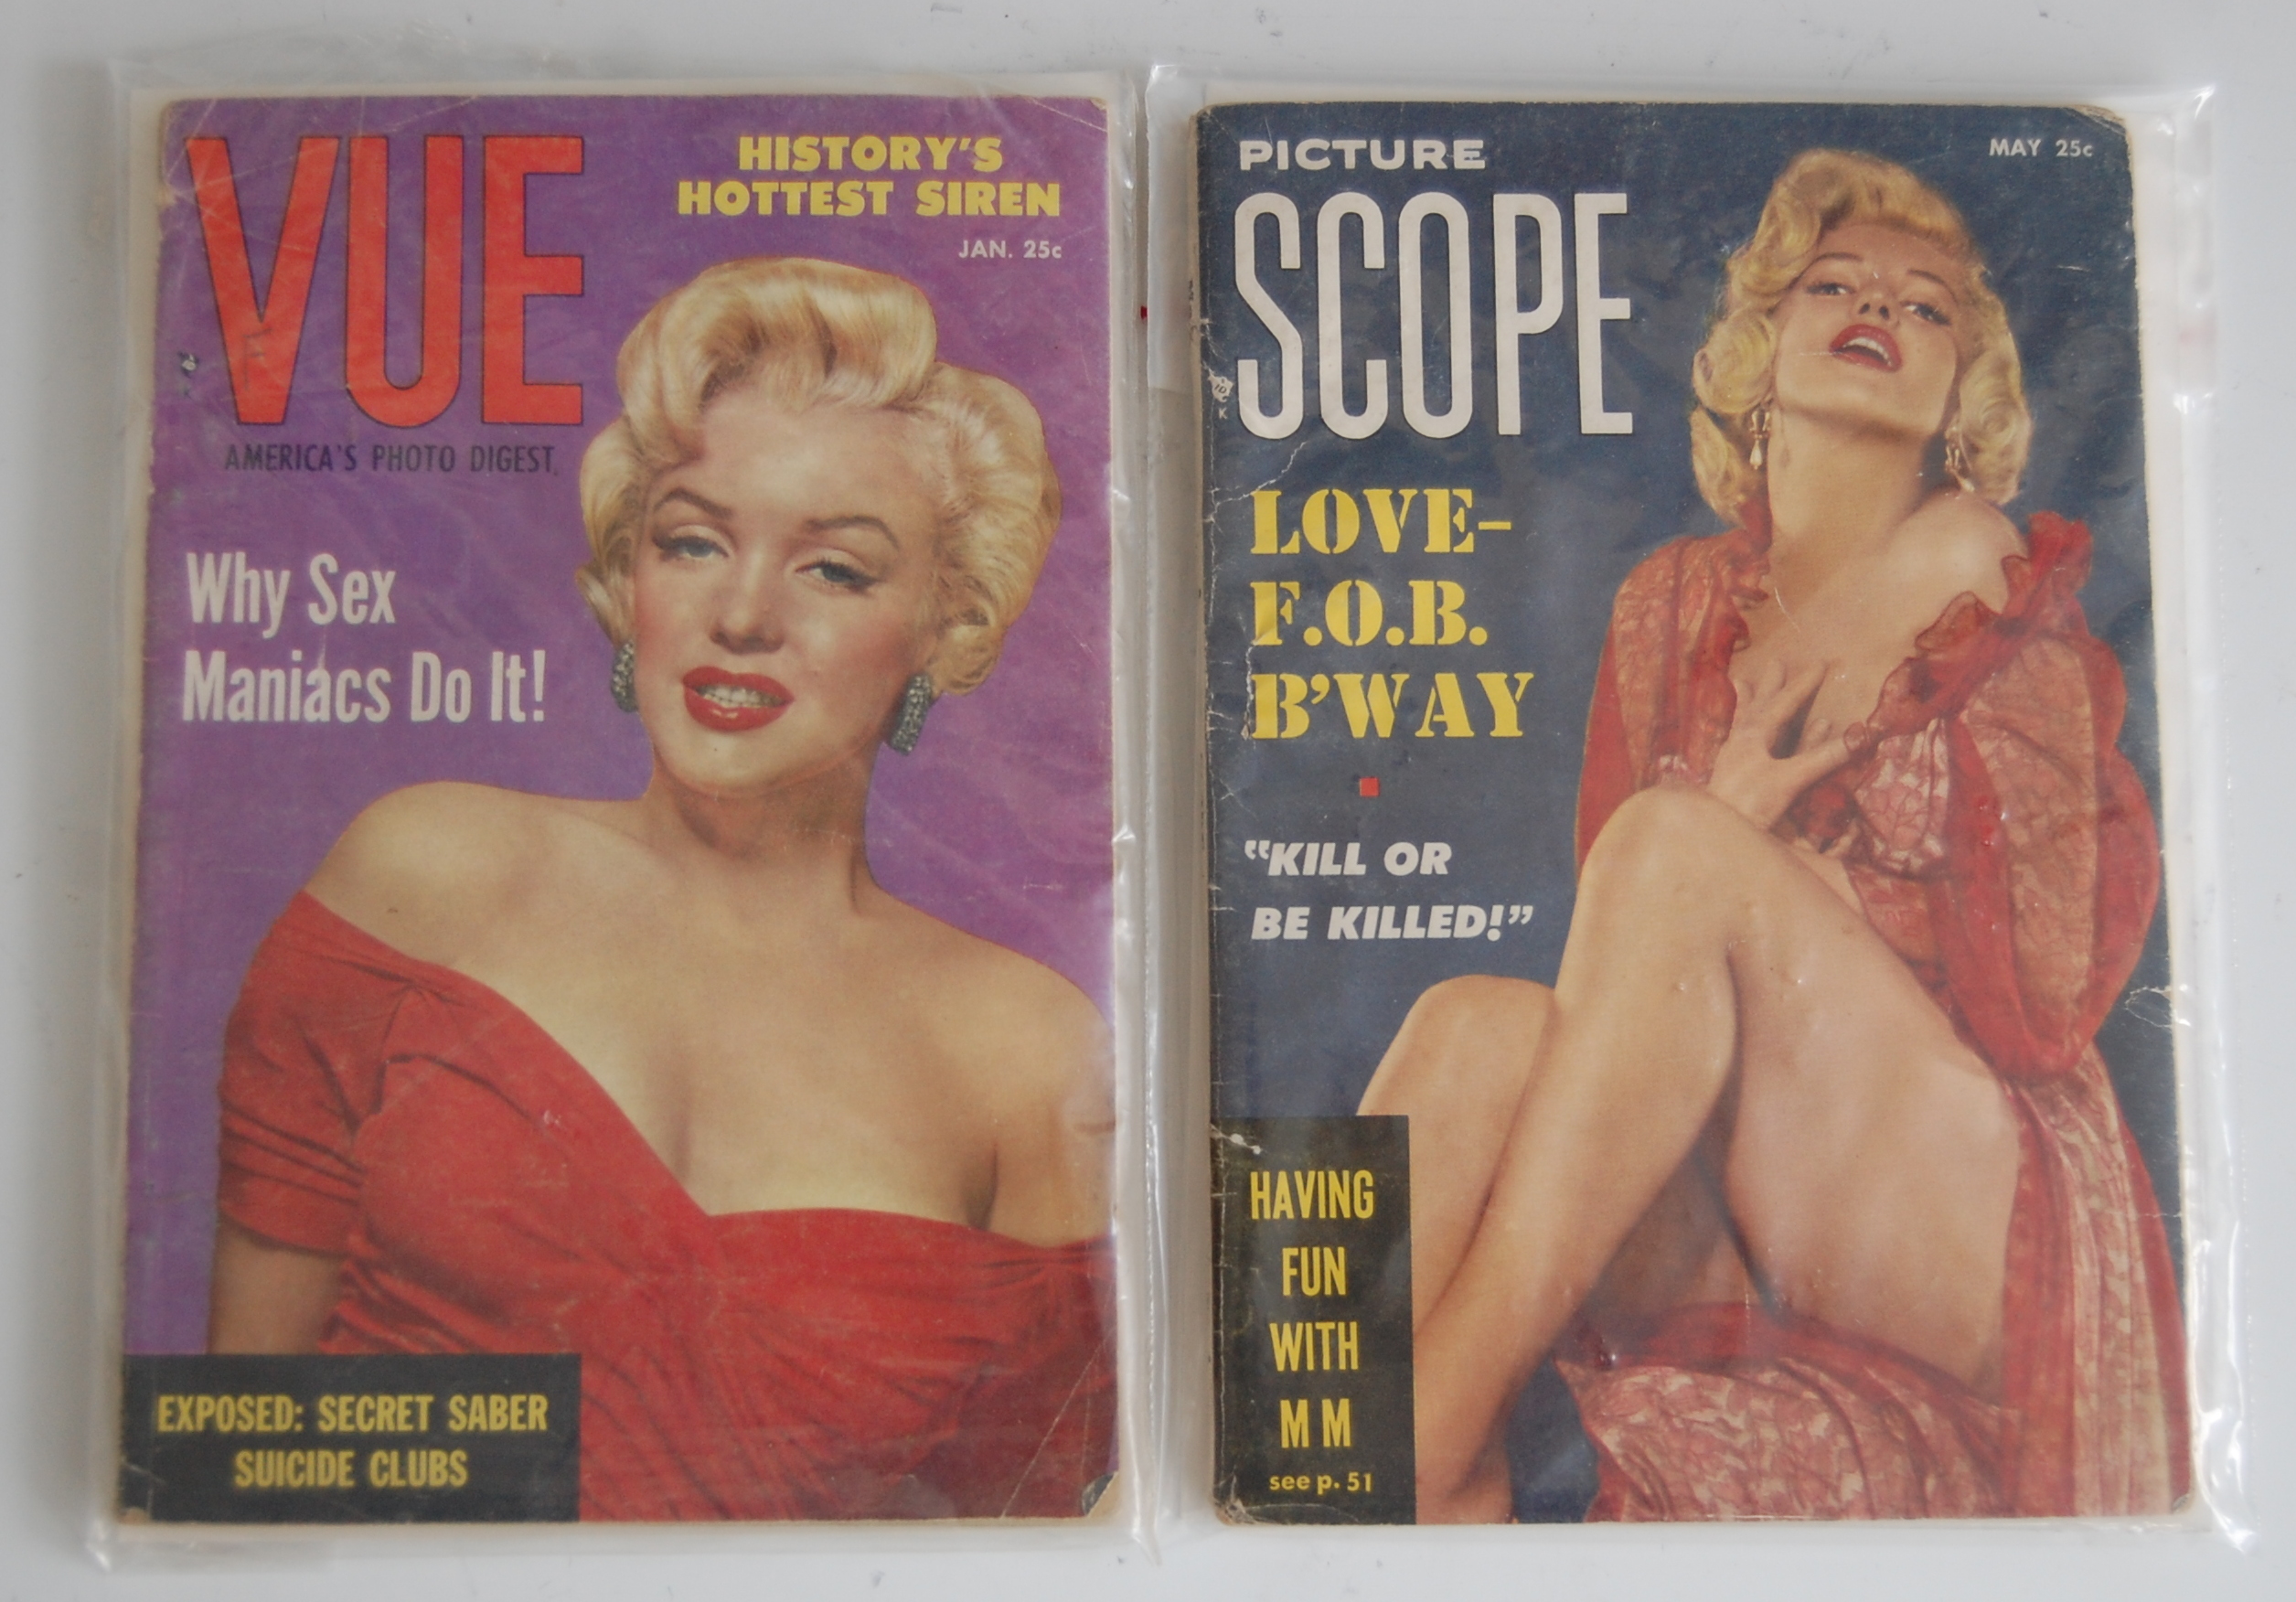 Marilyn Monroe interest - 1955 May issue of Picture Scope featuring Marilyn Monroe on front cover,